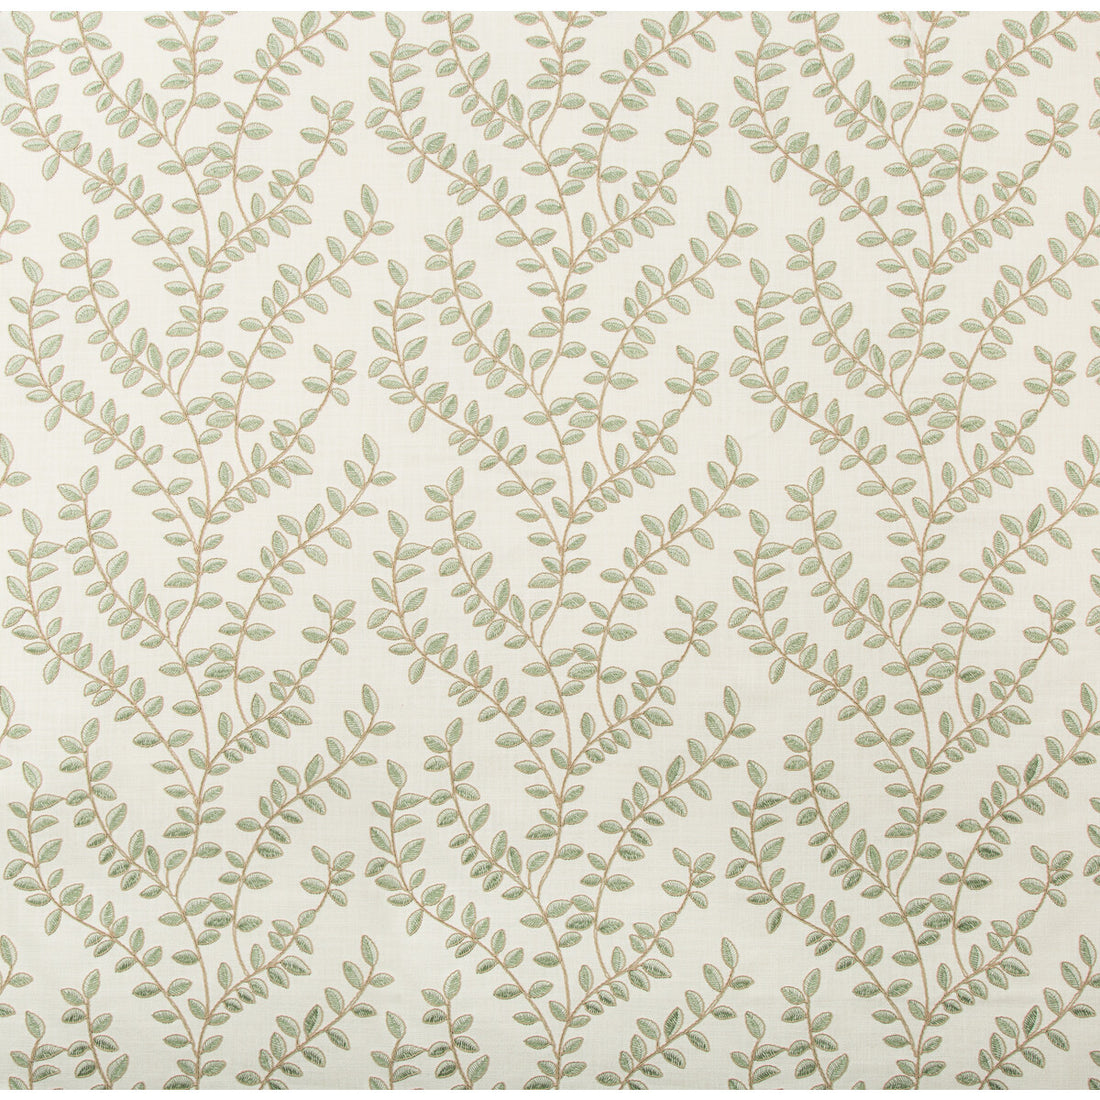 Kravet Basics fabric in 35792-13 color - pattern 35792.13.0 - by Kravet Basics in the Modern Embroideries III collection